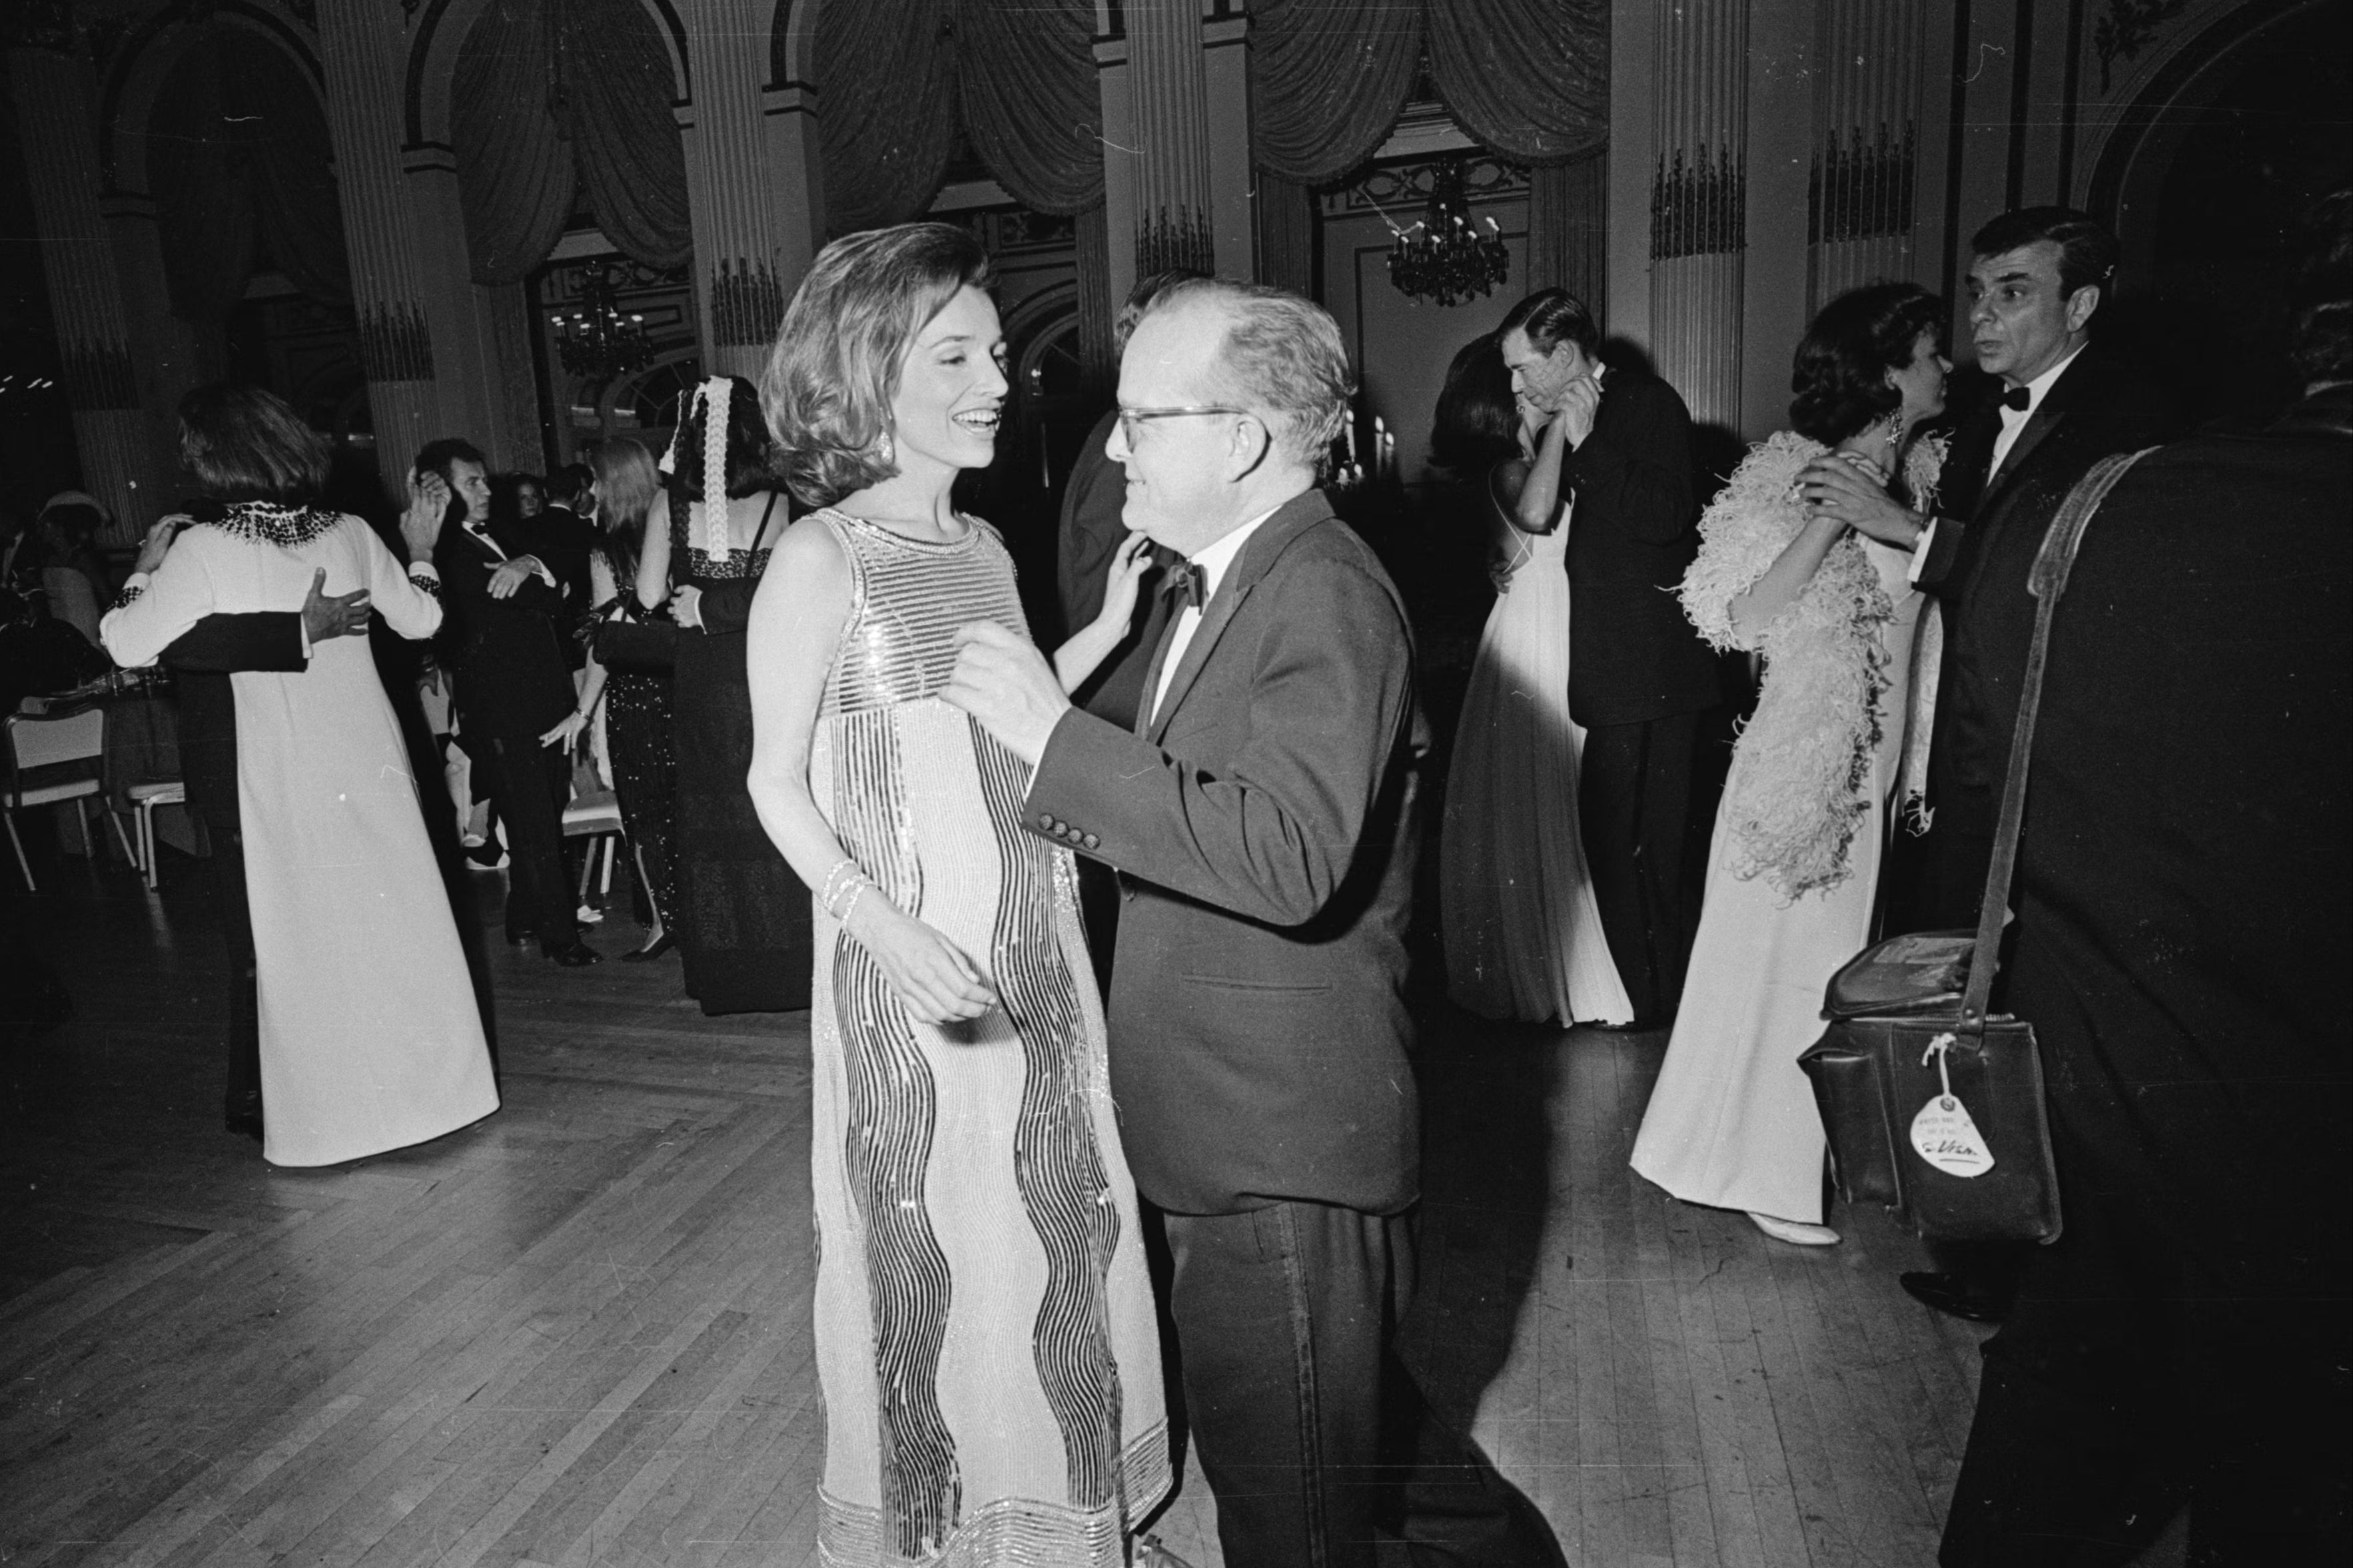 Dazzling: Lee Radziwill dances with Truman Capote at the Black and White Ball, hosted by the author in 1966